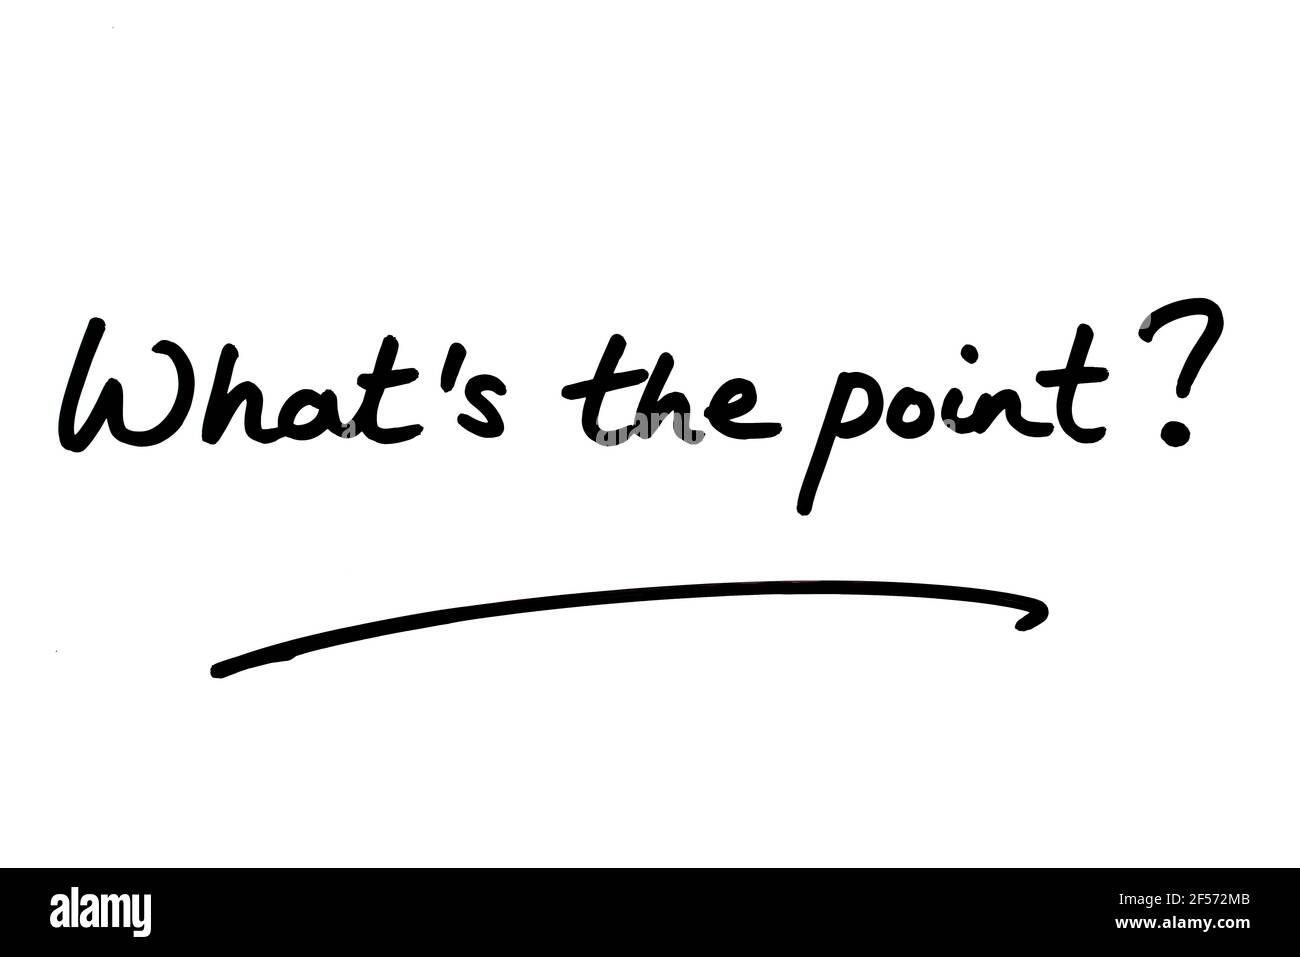 Whats the point? handwritten on a white background. Stock Photo